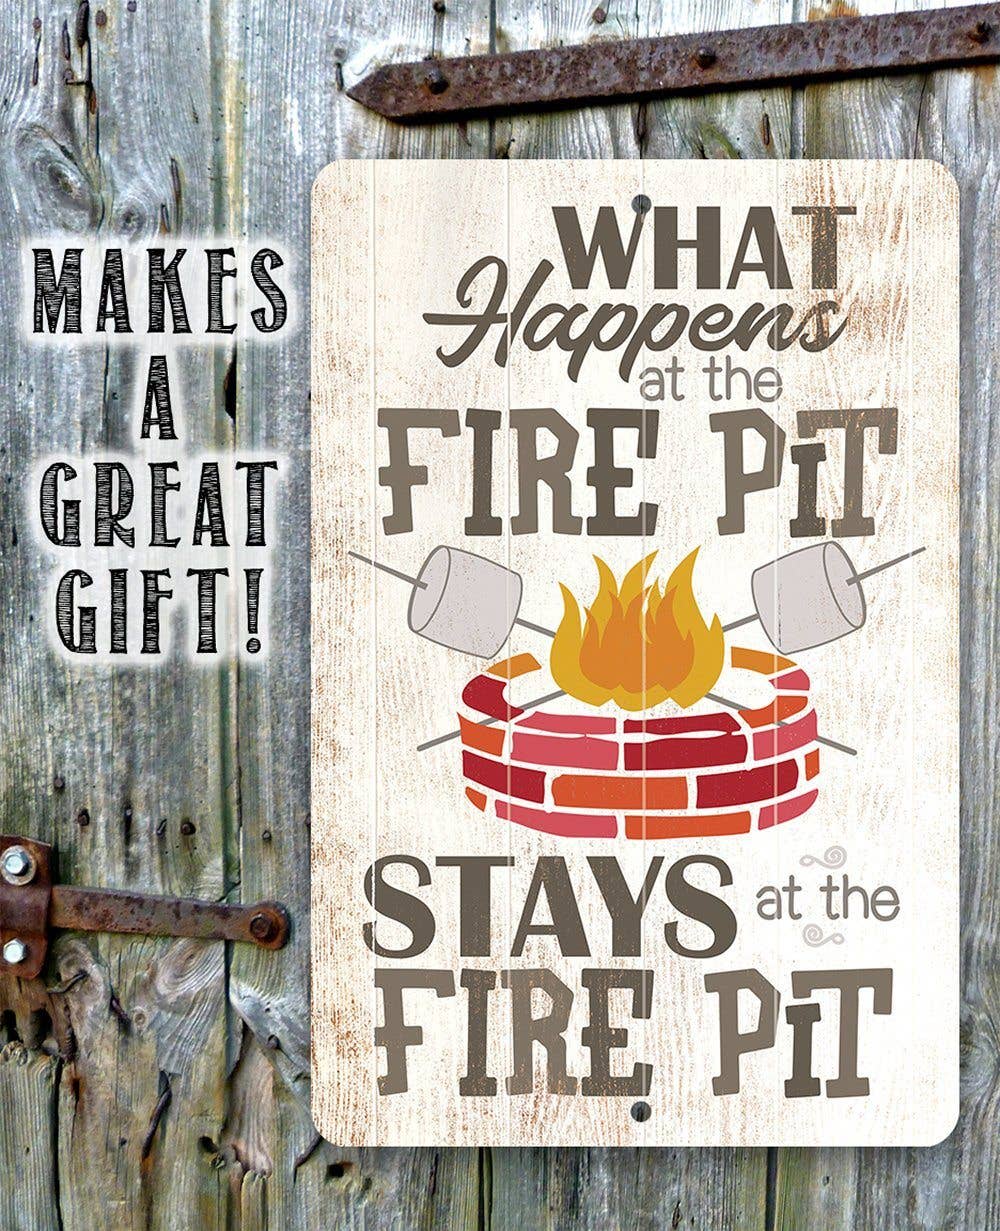 What Happens At The Firepit - Metal Sign: 8 x 12